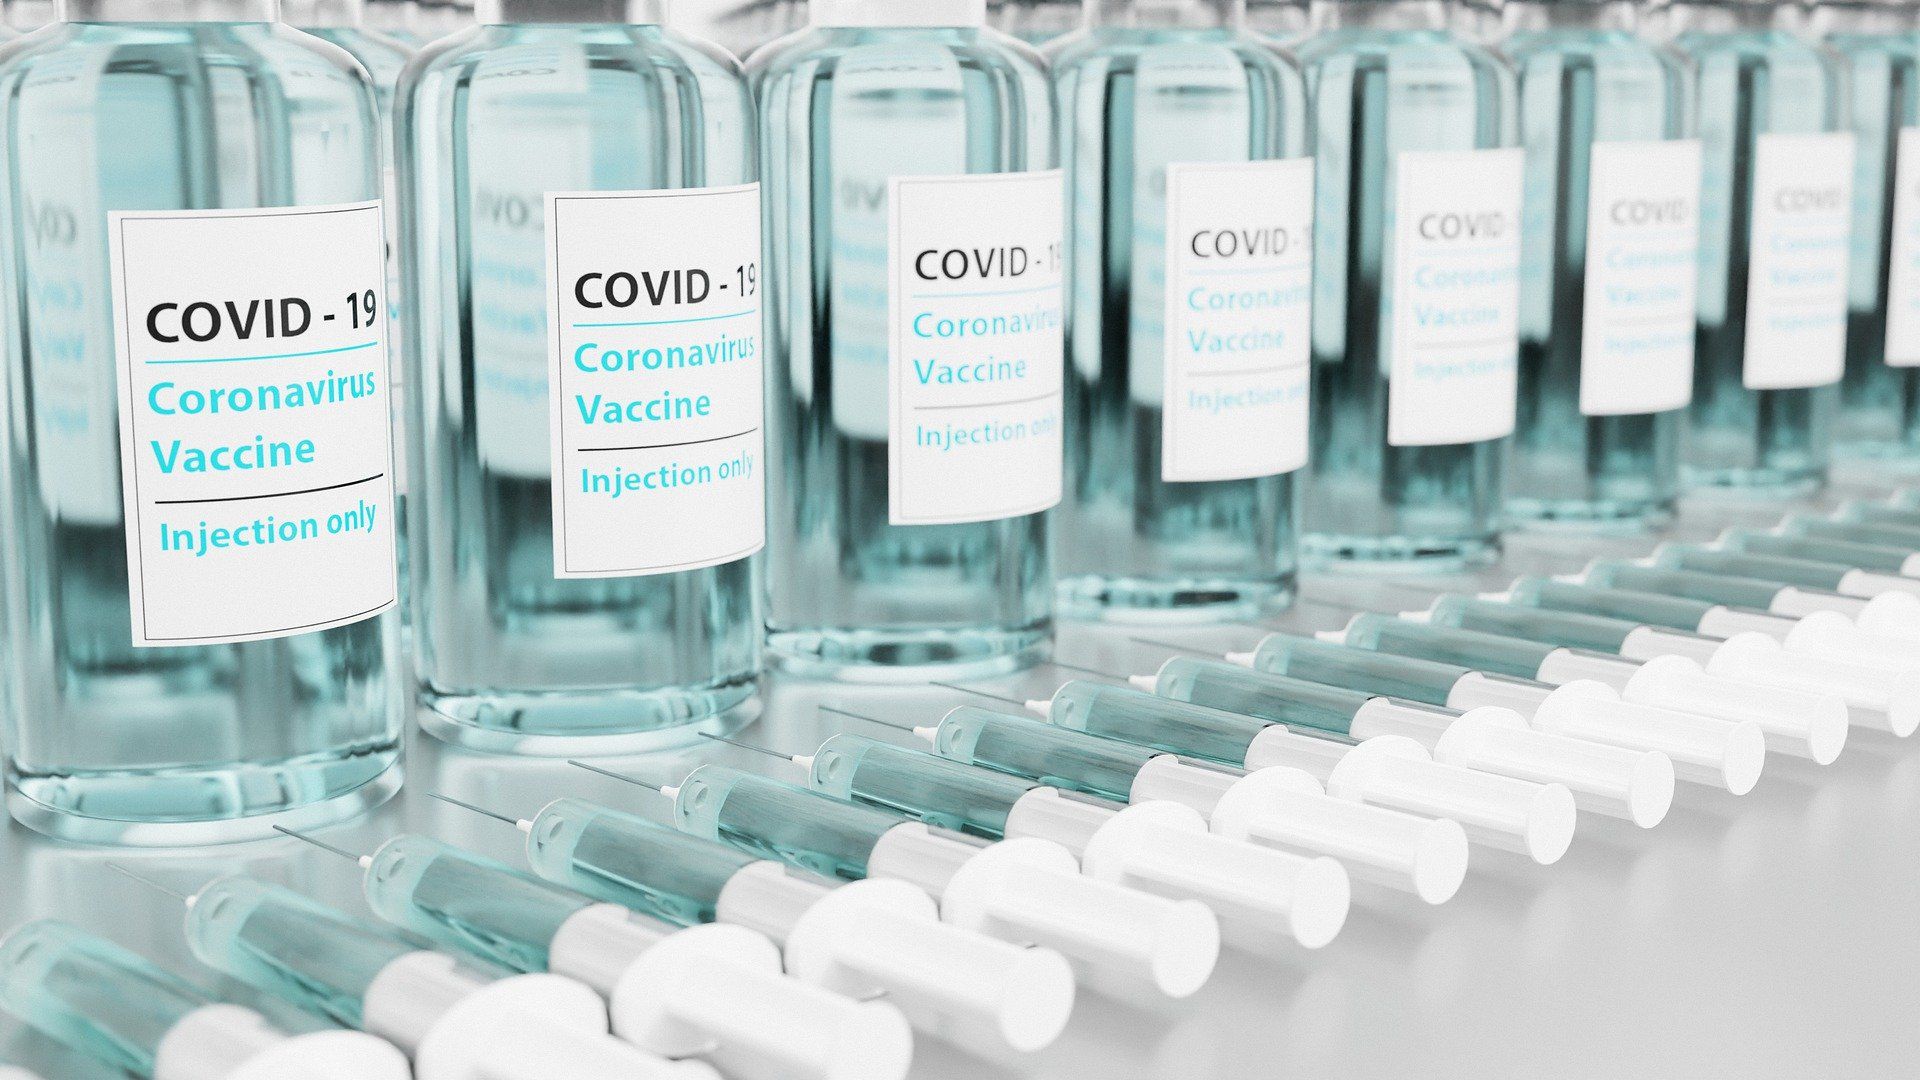 50% of all American adults fully vaccinated against COVID-19: White House